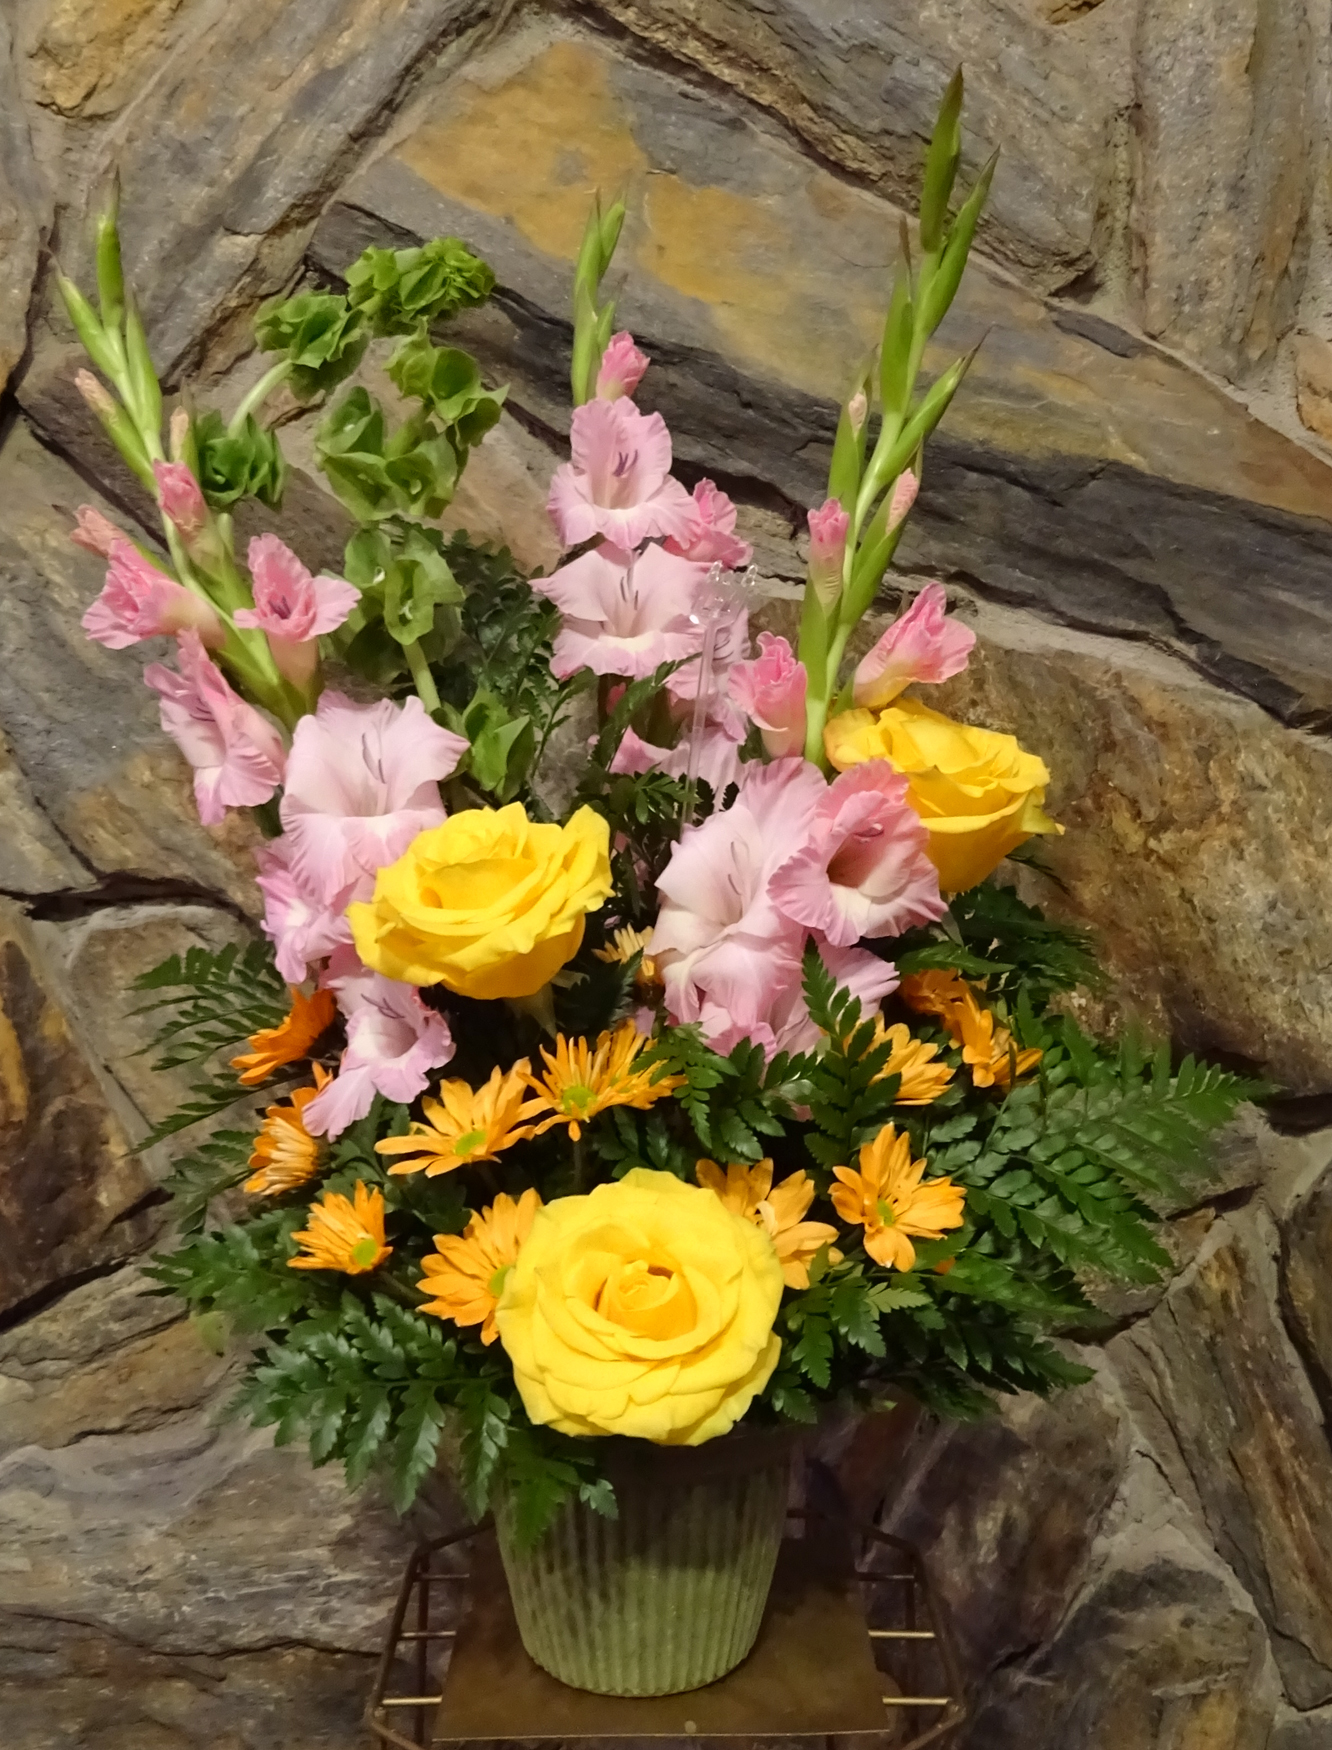 Flowers from City of Philip Employees